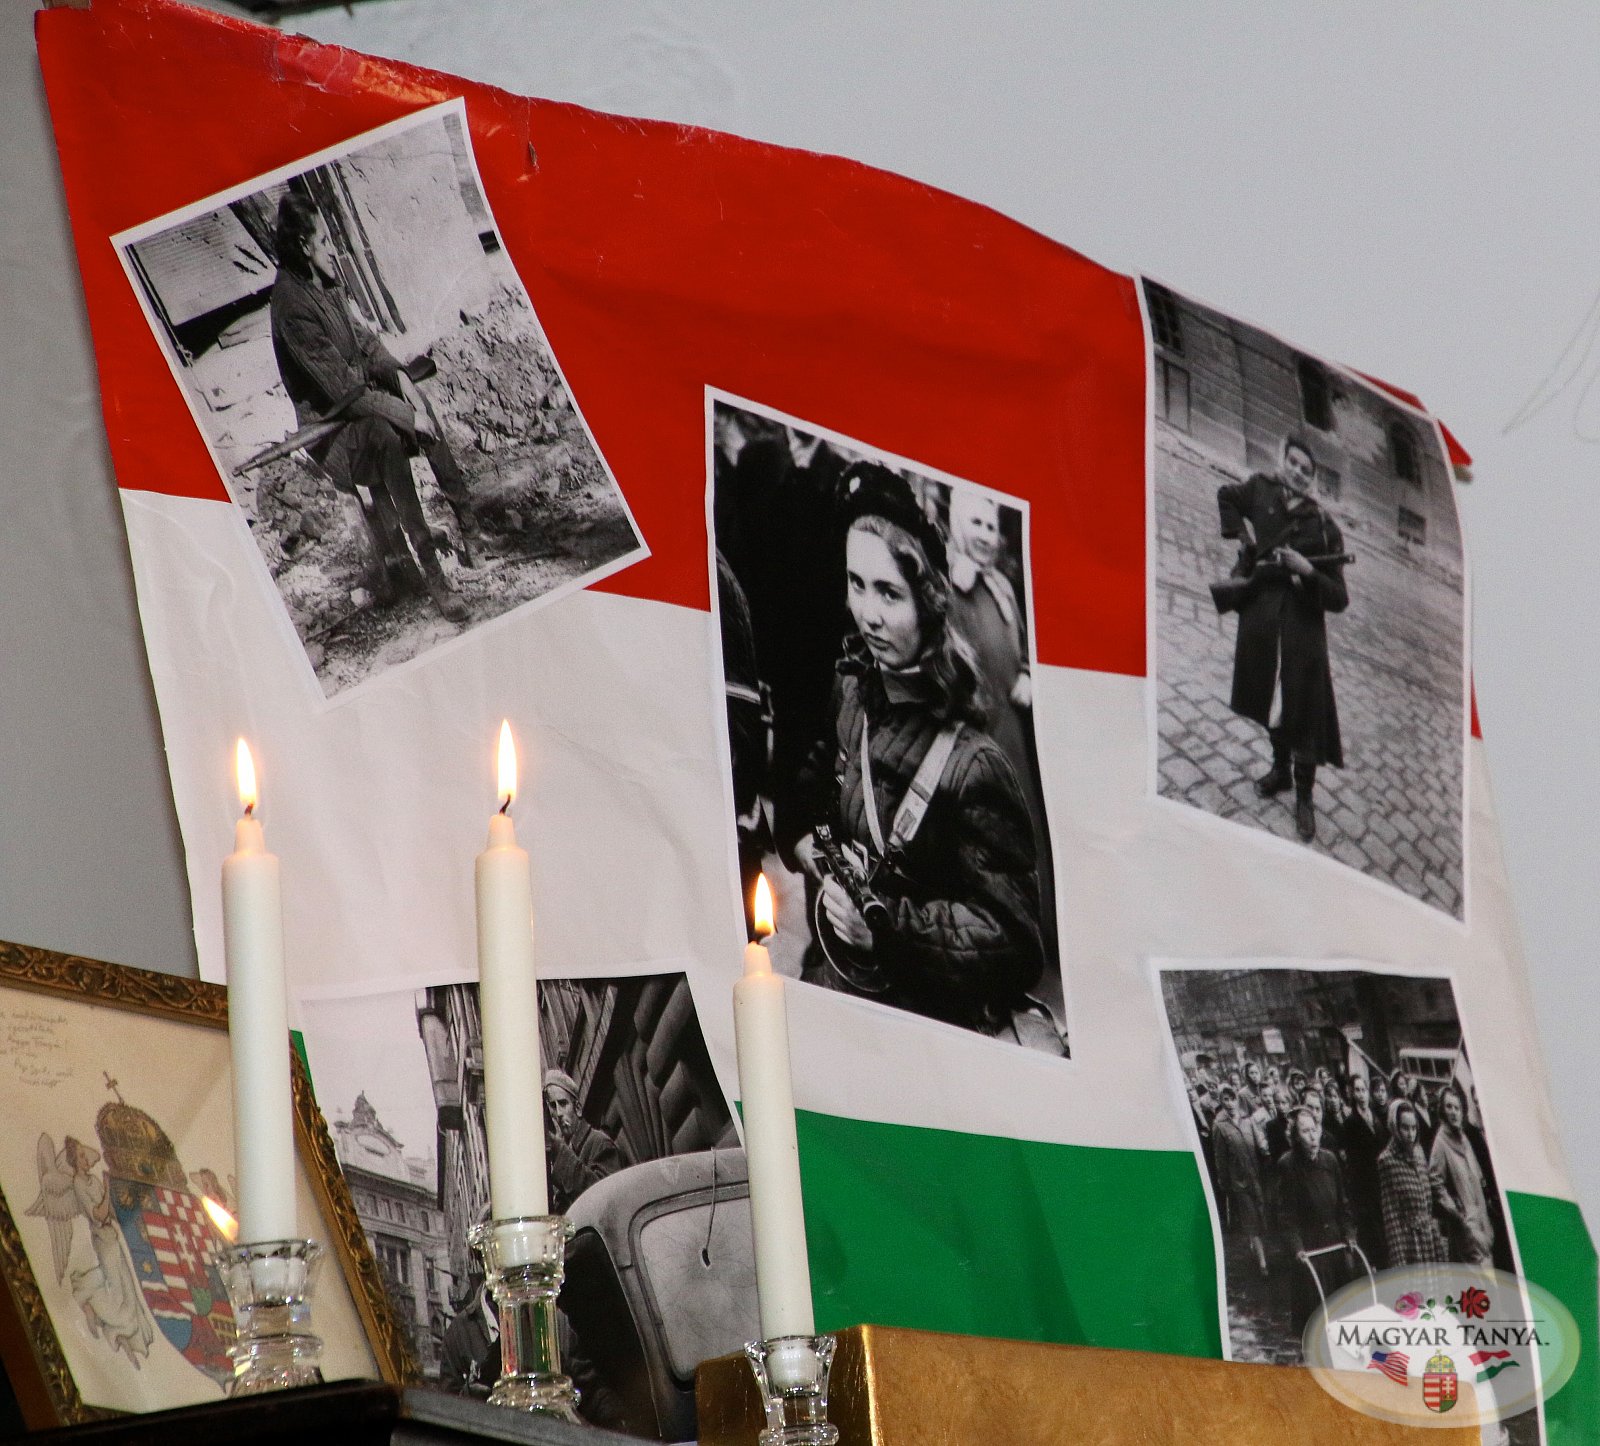 61th Anniversary of the Hungarian Revolution of 1956